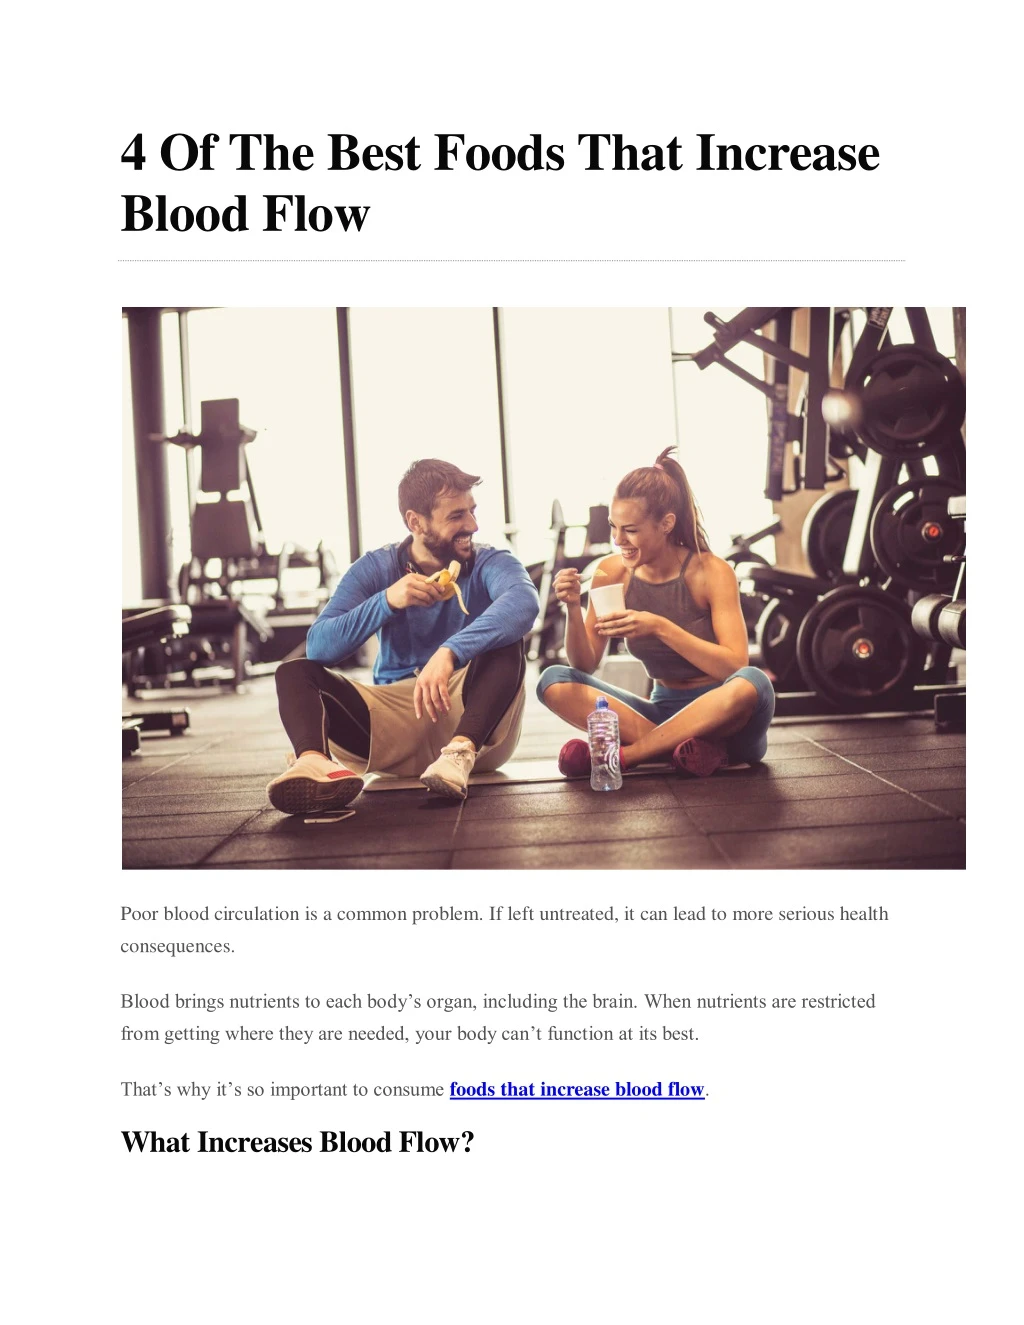 4 of the best foods that increase blood flow